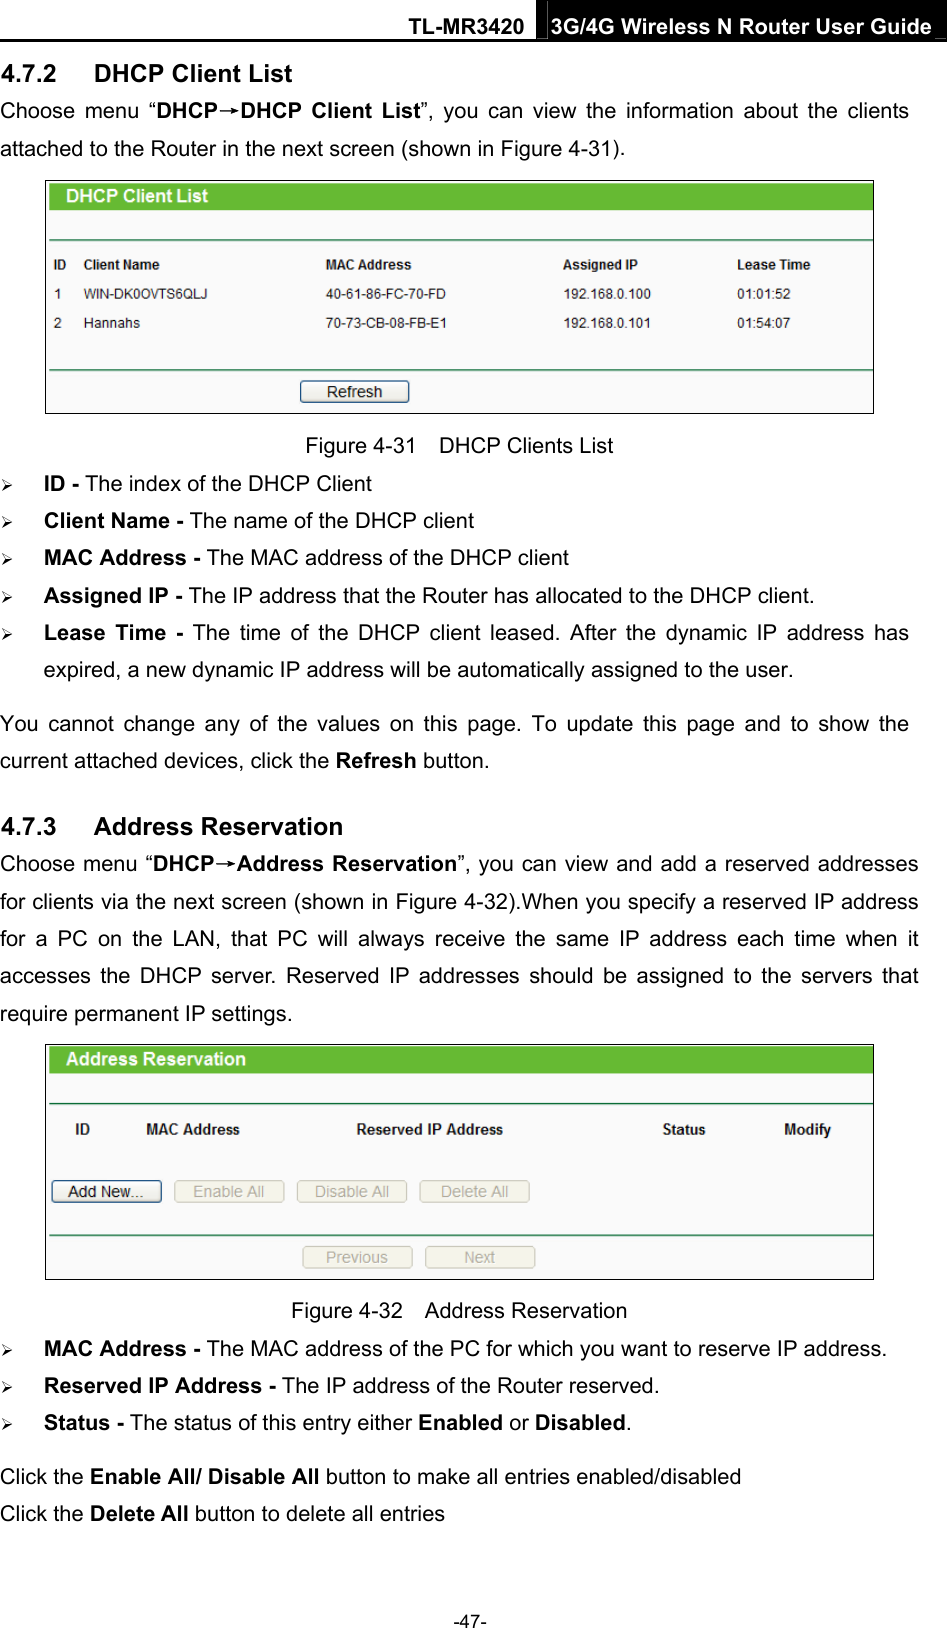 TL-MR3420 3G/4G Wireless N Router User Guide 4.7.2  DHCP Client List Choose menu “DHCP→DHCP Client List”, you can view the information about the clients attached to the Router in the next screen (shown in Figure 4-31).  Figure 4-31    DHCP Clients List  ID - The index of the DHCP Client    Client Name - The name of the DHCP client    MAC Address - The MAC address of the DHCP client    Assigned IP - The IP address that the Router has allocated to the DHCP client.  Lease Time - The time of the DHCP client leased. After the dynamic IP address has expired, a new dynamic IP address will be automatically assigned to the user. You cannot change any of the values on this page. To update this page and to show the current attached devices, click the Refresh button. 4.7.3  Address Reservation Choose menu “DHCP→Address Reservation”, you can view and add a reserved addresses for clients via the next screen (shown in Figure 4-32).When you specify a reserved IP address for a PC on the LAN, that PC will always receive the same IP address each time when it accesses the DHCP server. Reserved IP addresses should be assigned to the servers that require permanent IP settings.    Figure 4-32  Address Reservation  MAC Address - The MAC address of the PC for which you want to reserve IP address.  Reserved IP Address - The IP address of the Router reserved.  Status - The status of this entry either Enabled or Disabled. Click the Enable All/ Disable All button to make all entries enabled/disabled Click the Delete All button to delete all entries -47- 